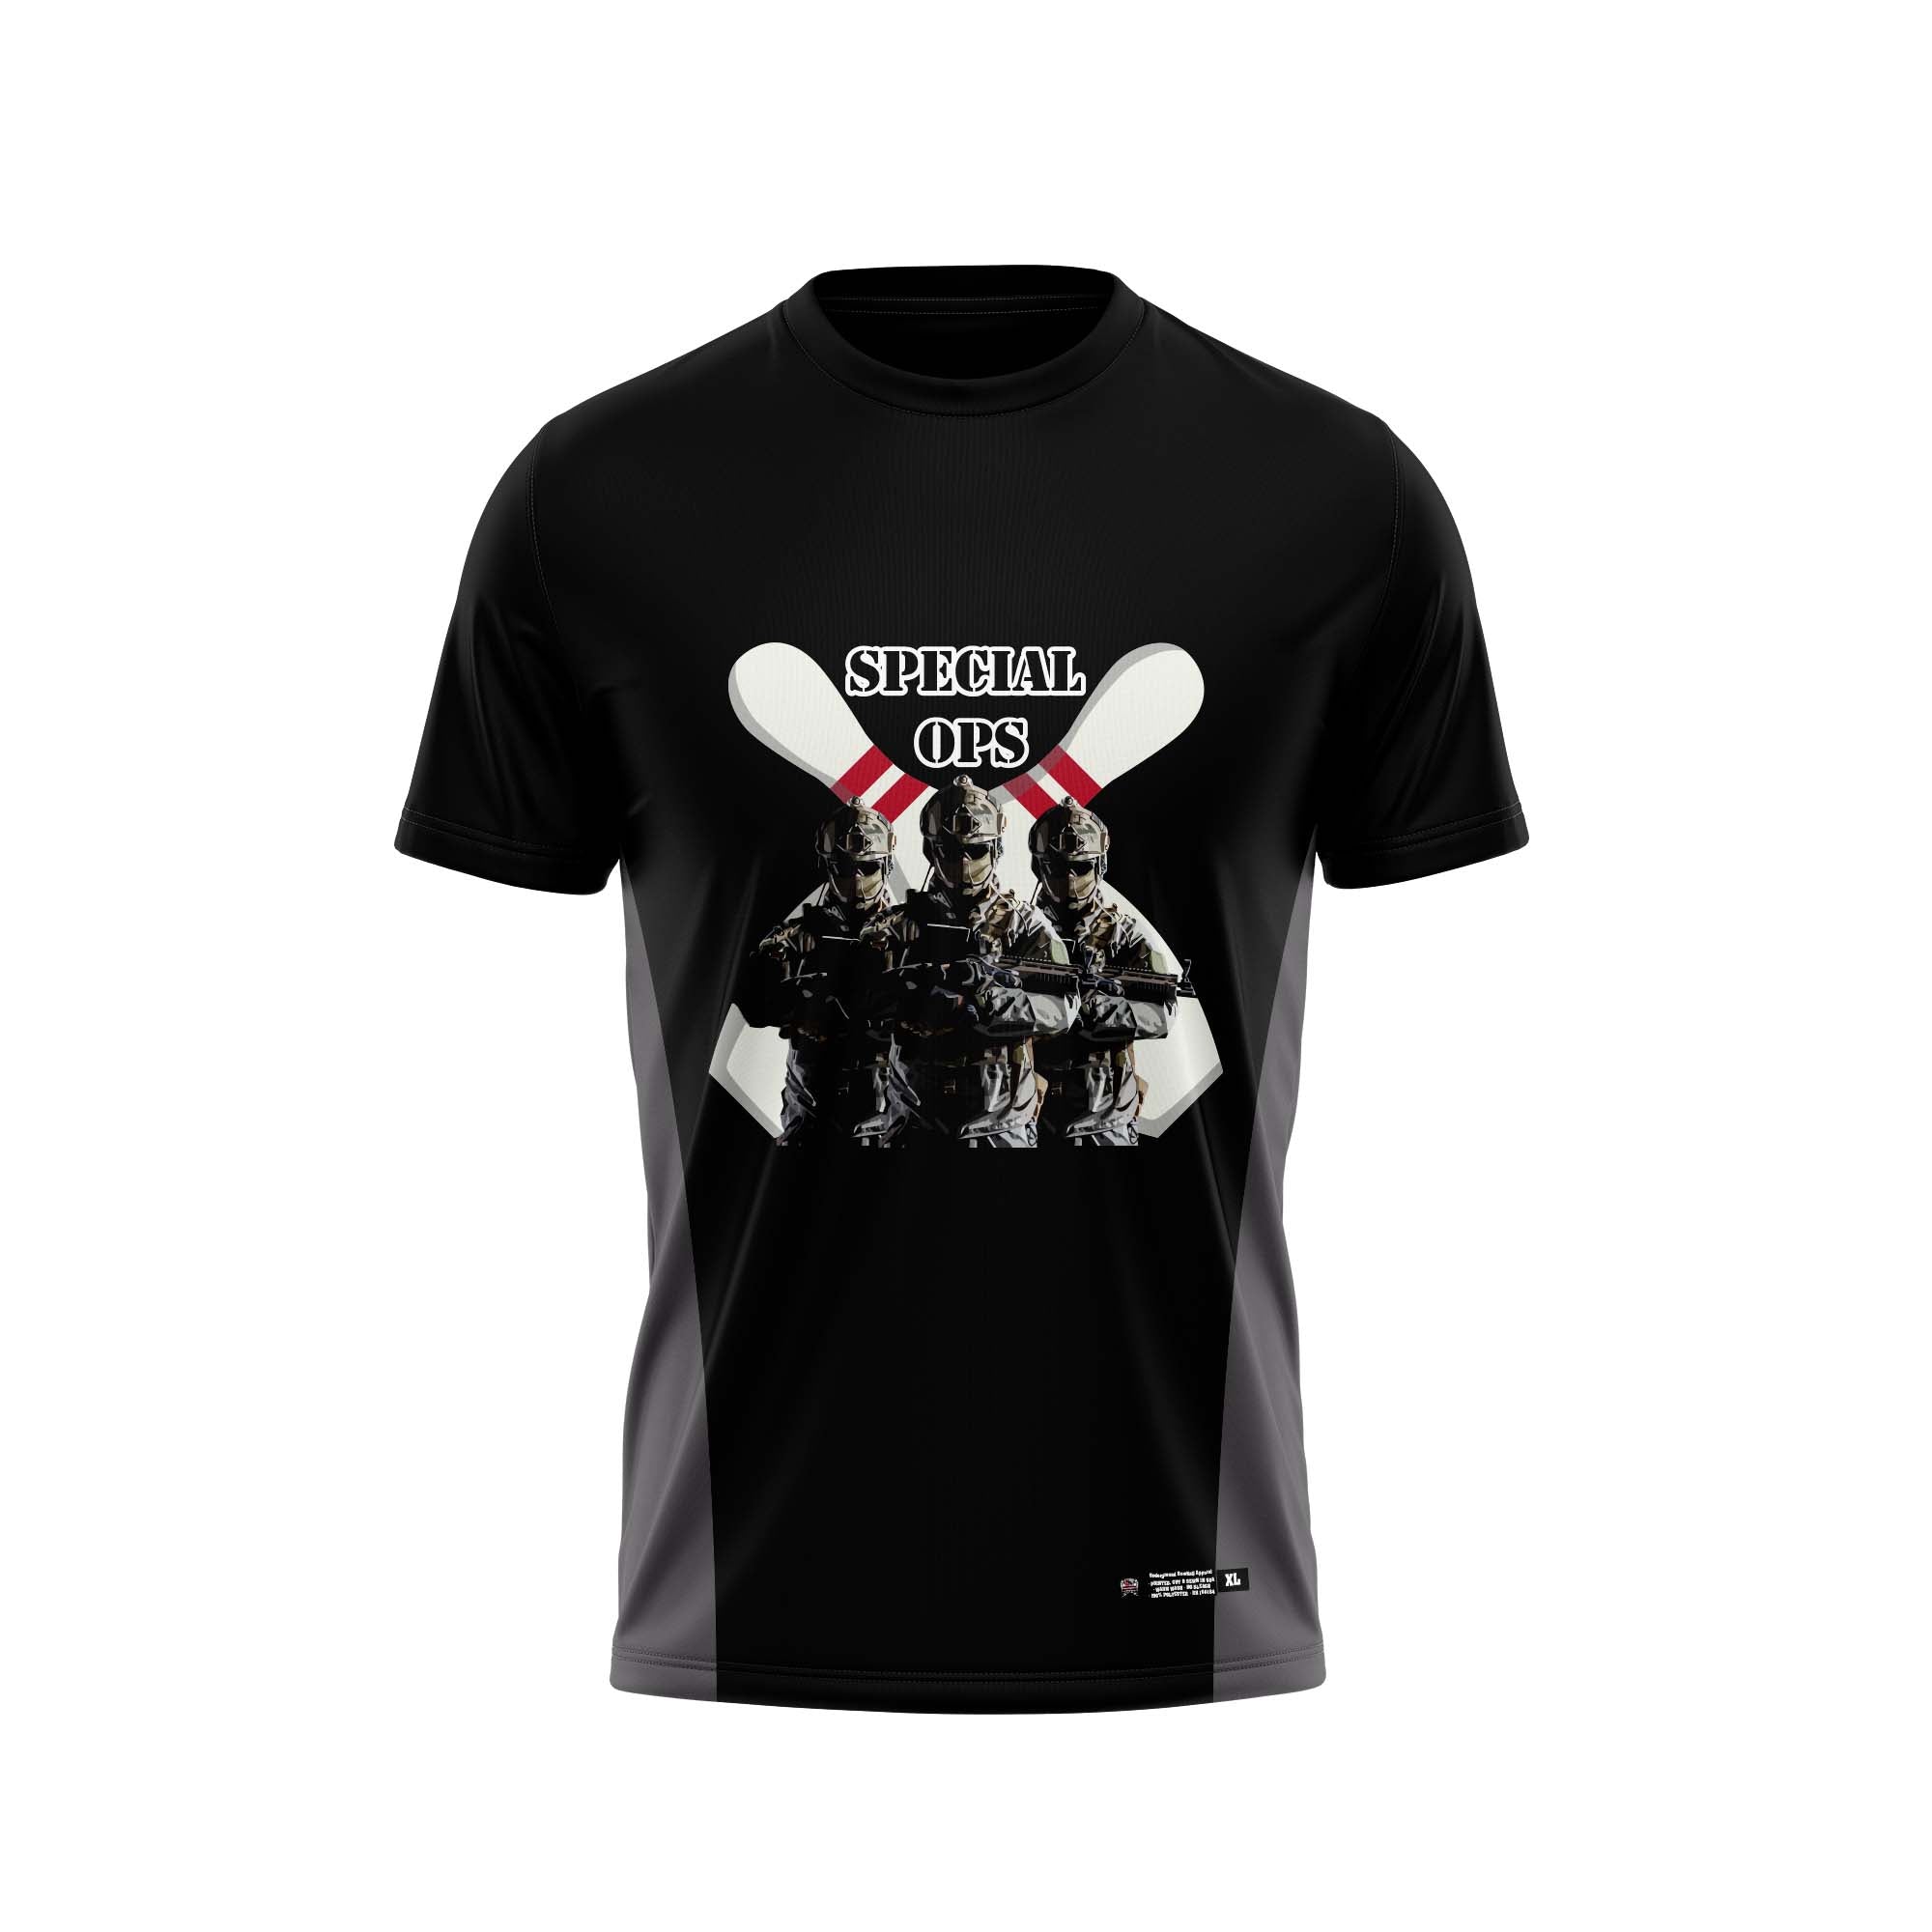 Special Ops Black / Gray Jersey